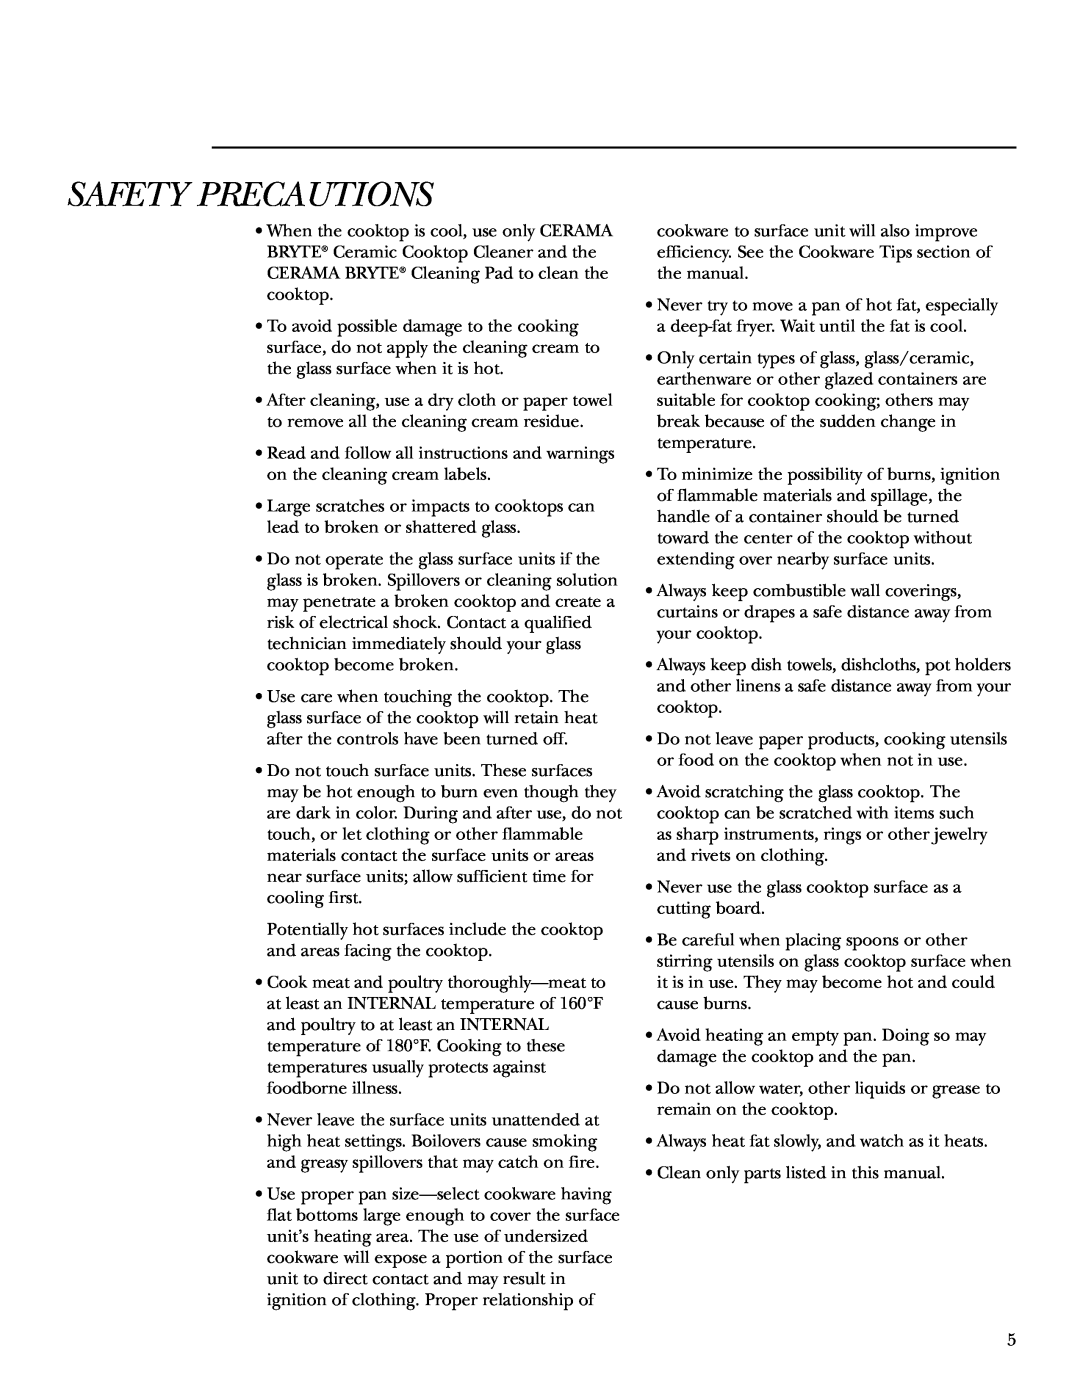 GE ZEU769 owner manual Safety Precautions, •Always heat fat slowly, and watch as it heats 